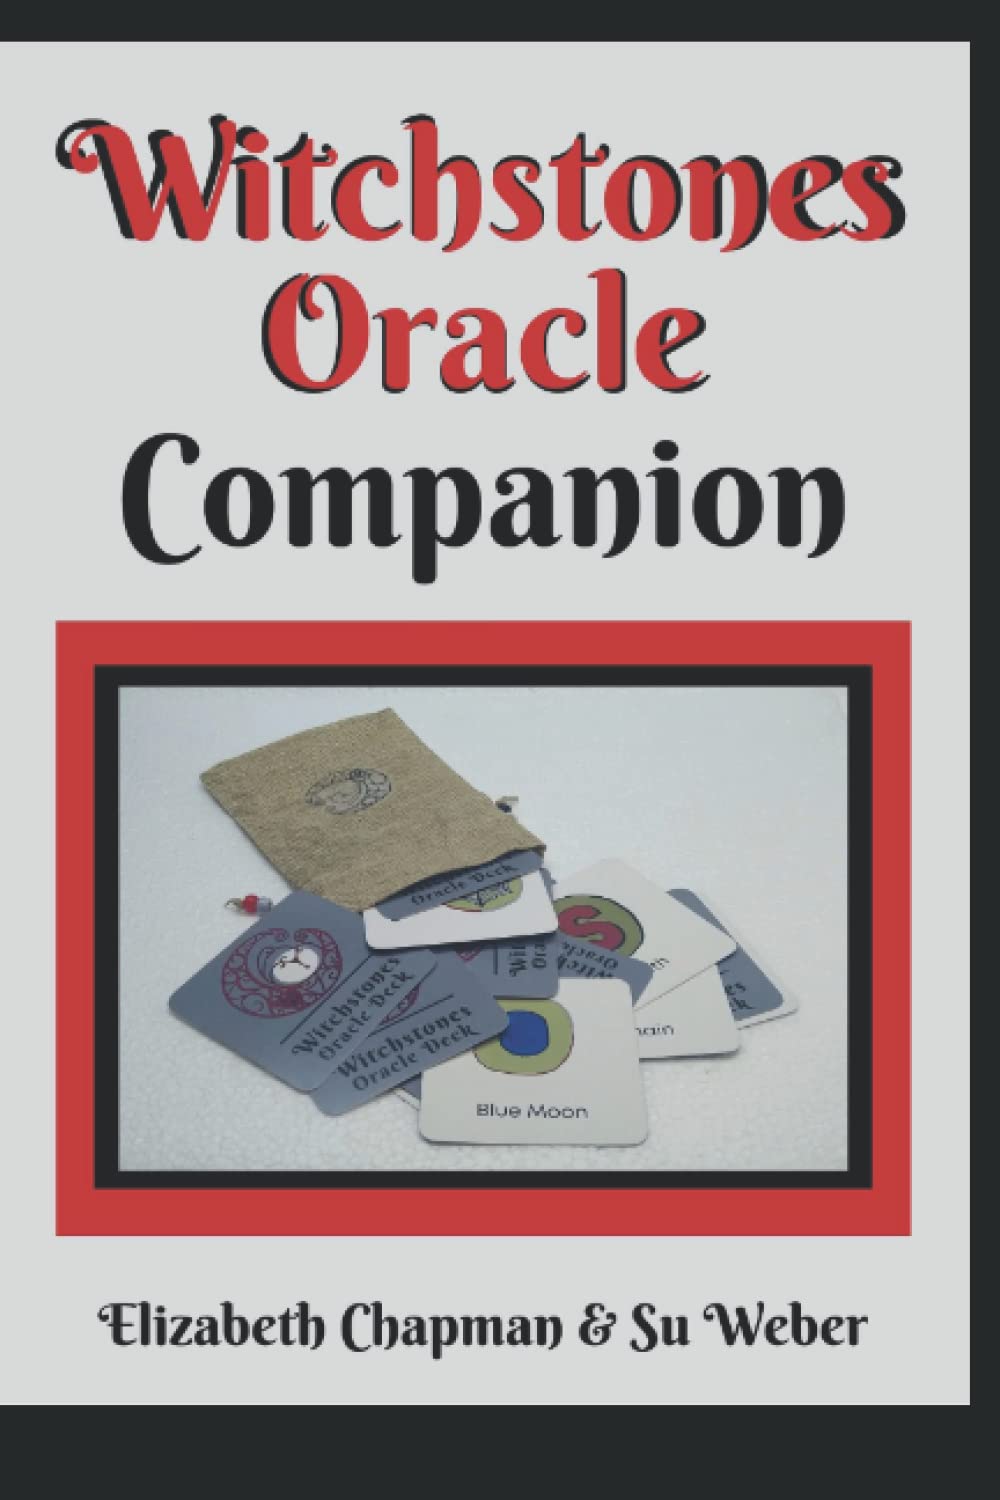 Witchstones Oracle Companion